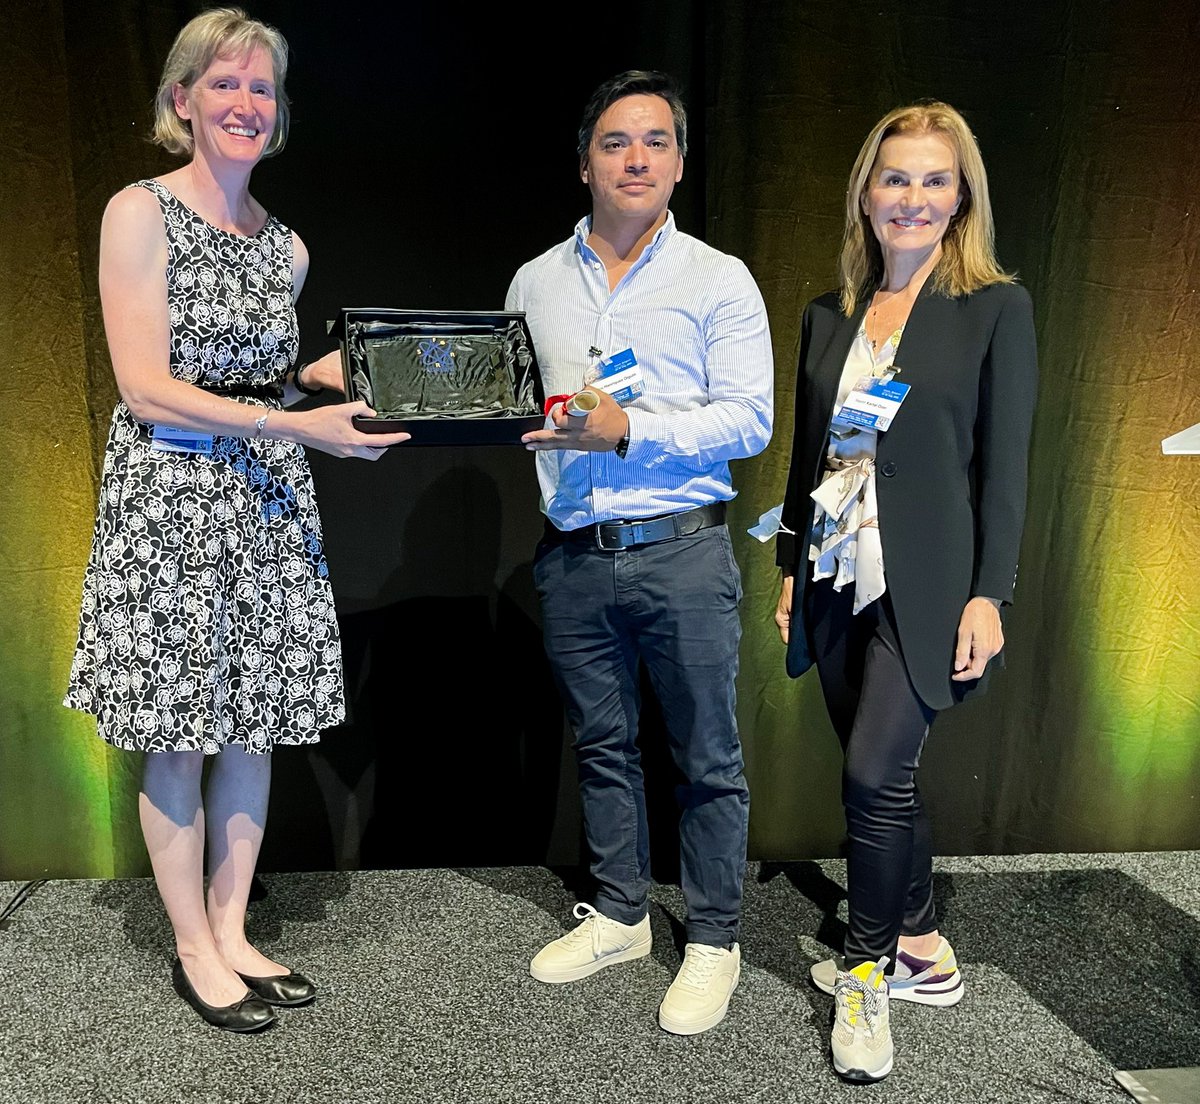 DDA-FUNDED RESEARCHER RECEIVES CATHERINE PASQUIER AWARD Carlos Henriquez Olguín @MuscleBiology received the Catherine Pasquier Award last week at the Redox Biology Congress 2022 in Ghent, Belgium. A very big congratulations from the DDA! #sfrr #research #award